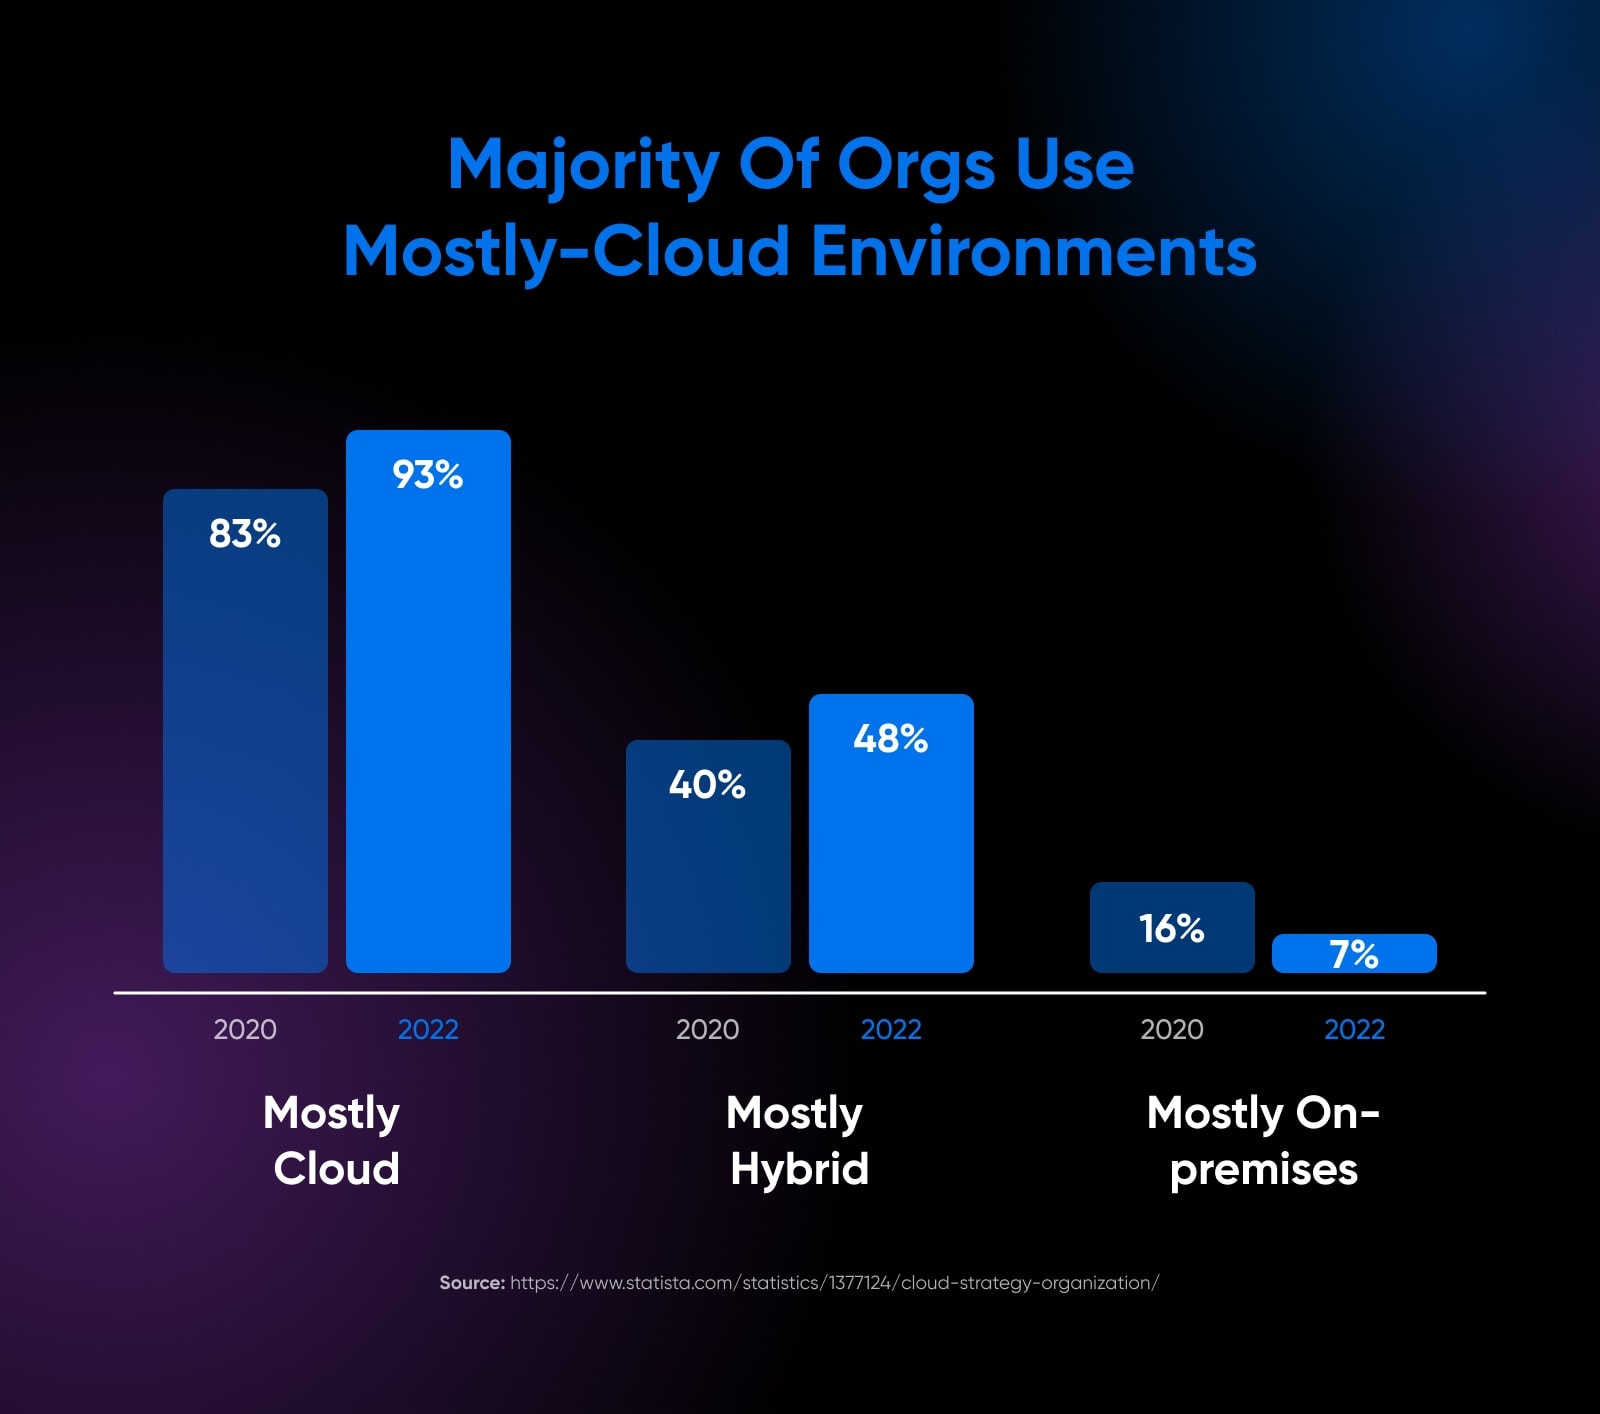 bar graph comparing orgs that use cloud to hybrid between 2020 and 2022, showing most orgs use cloud and very few (7% in 2022) use on premise environments